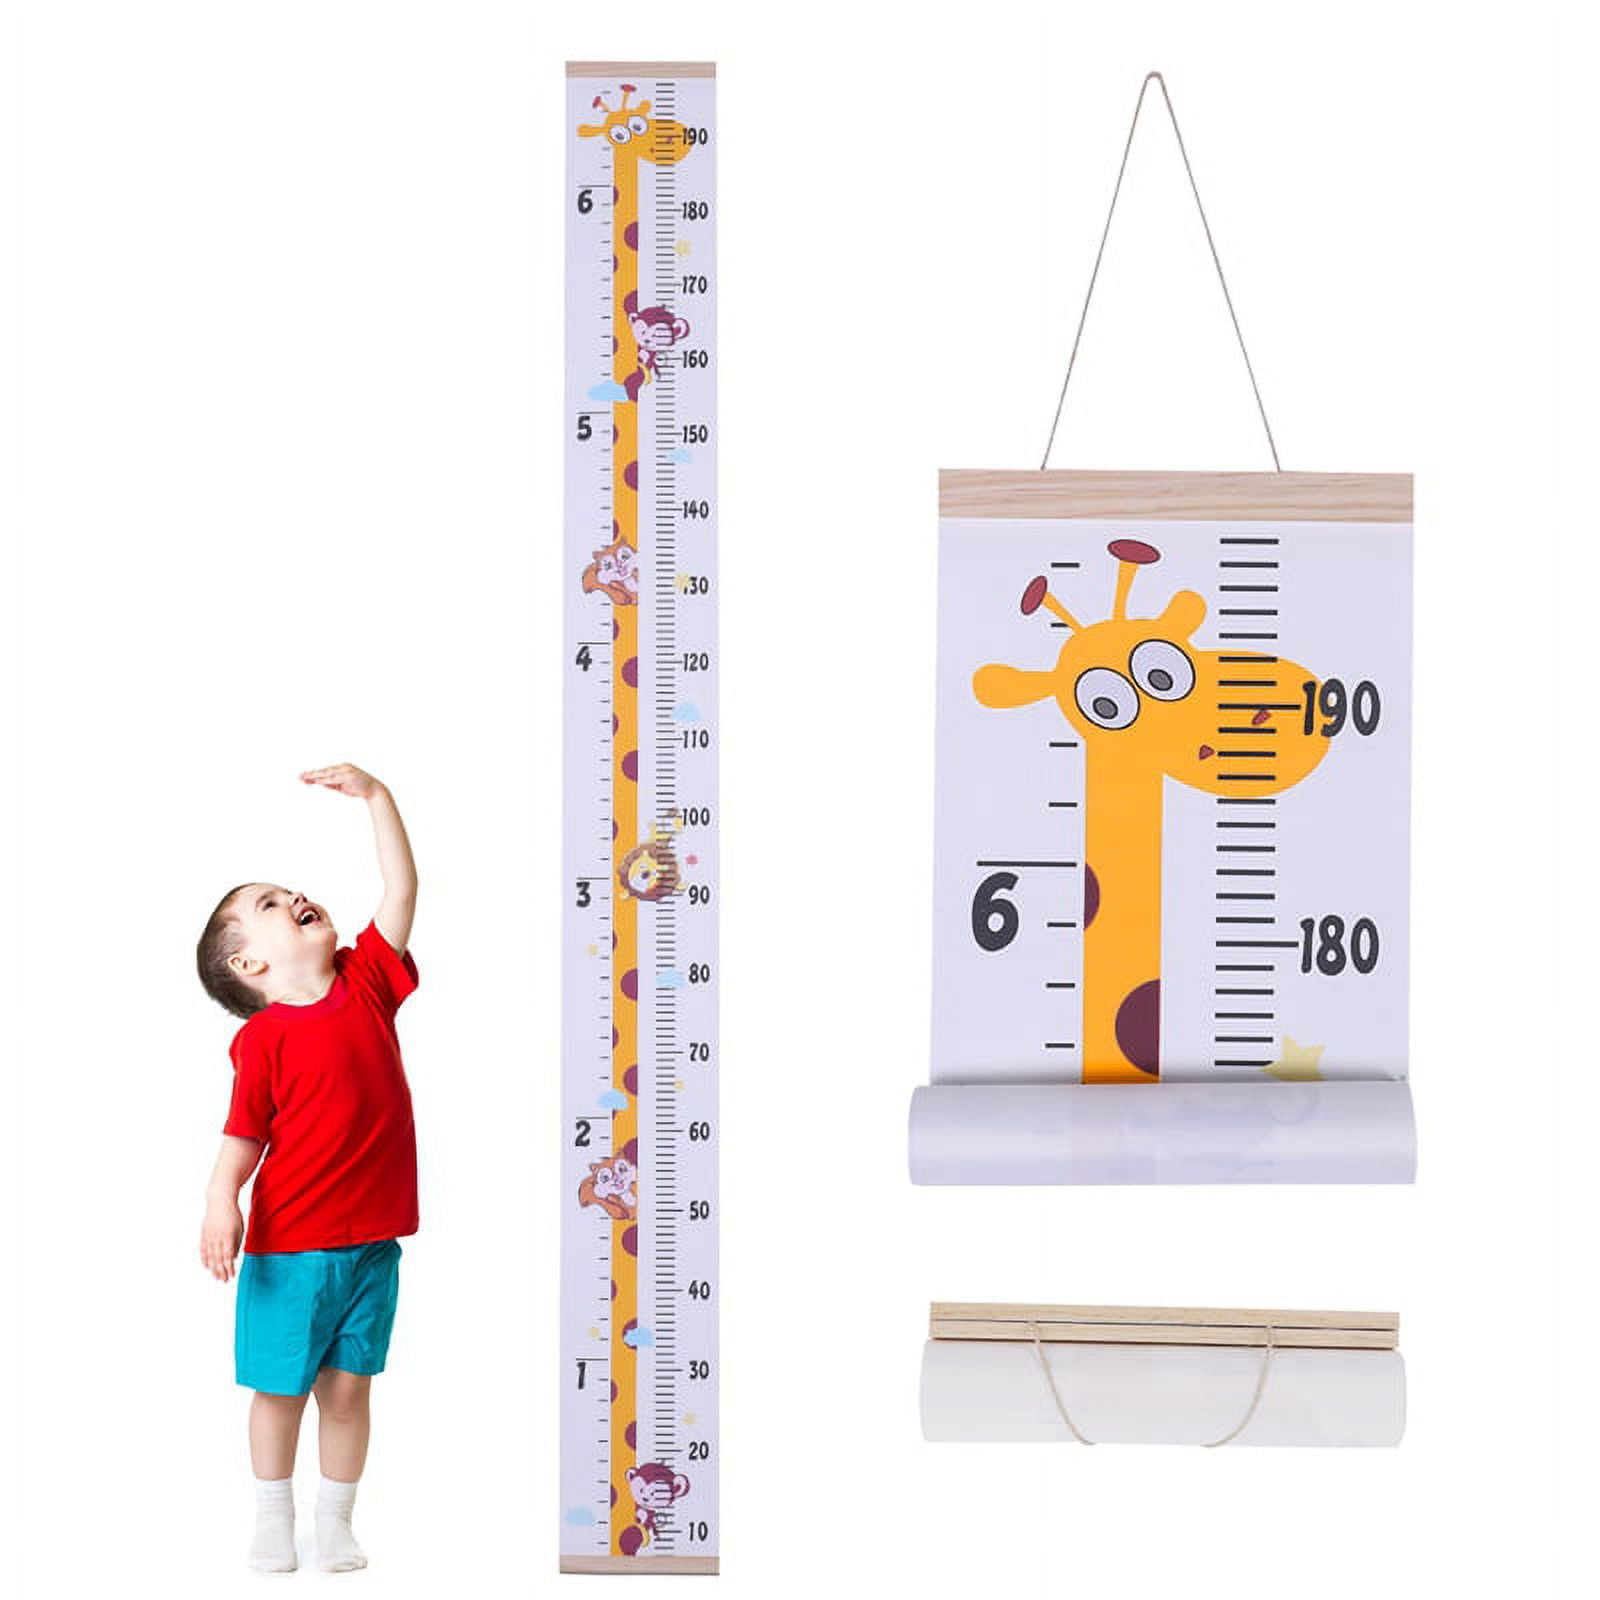 Roll-Up Height Growth Charts For Children - Measure Me!